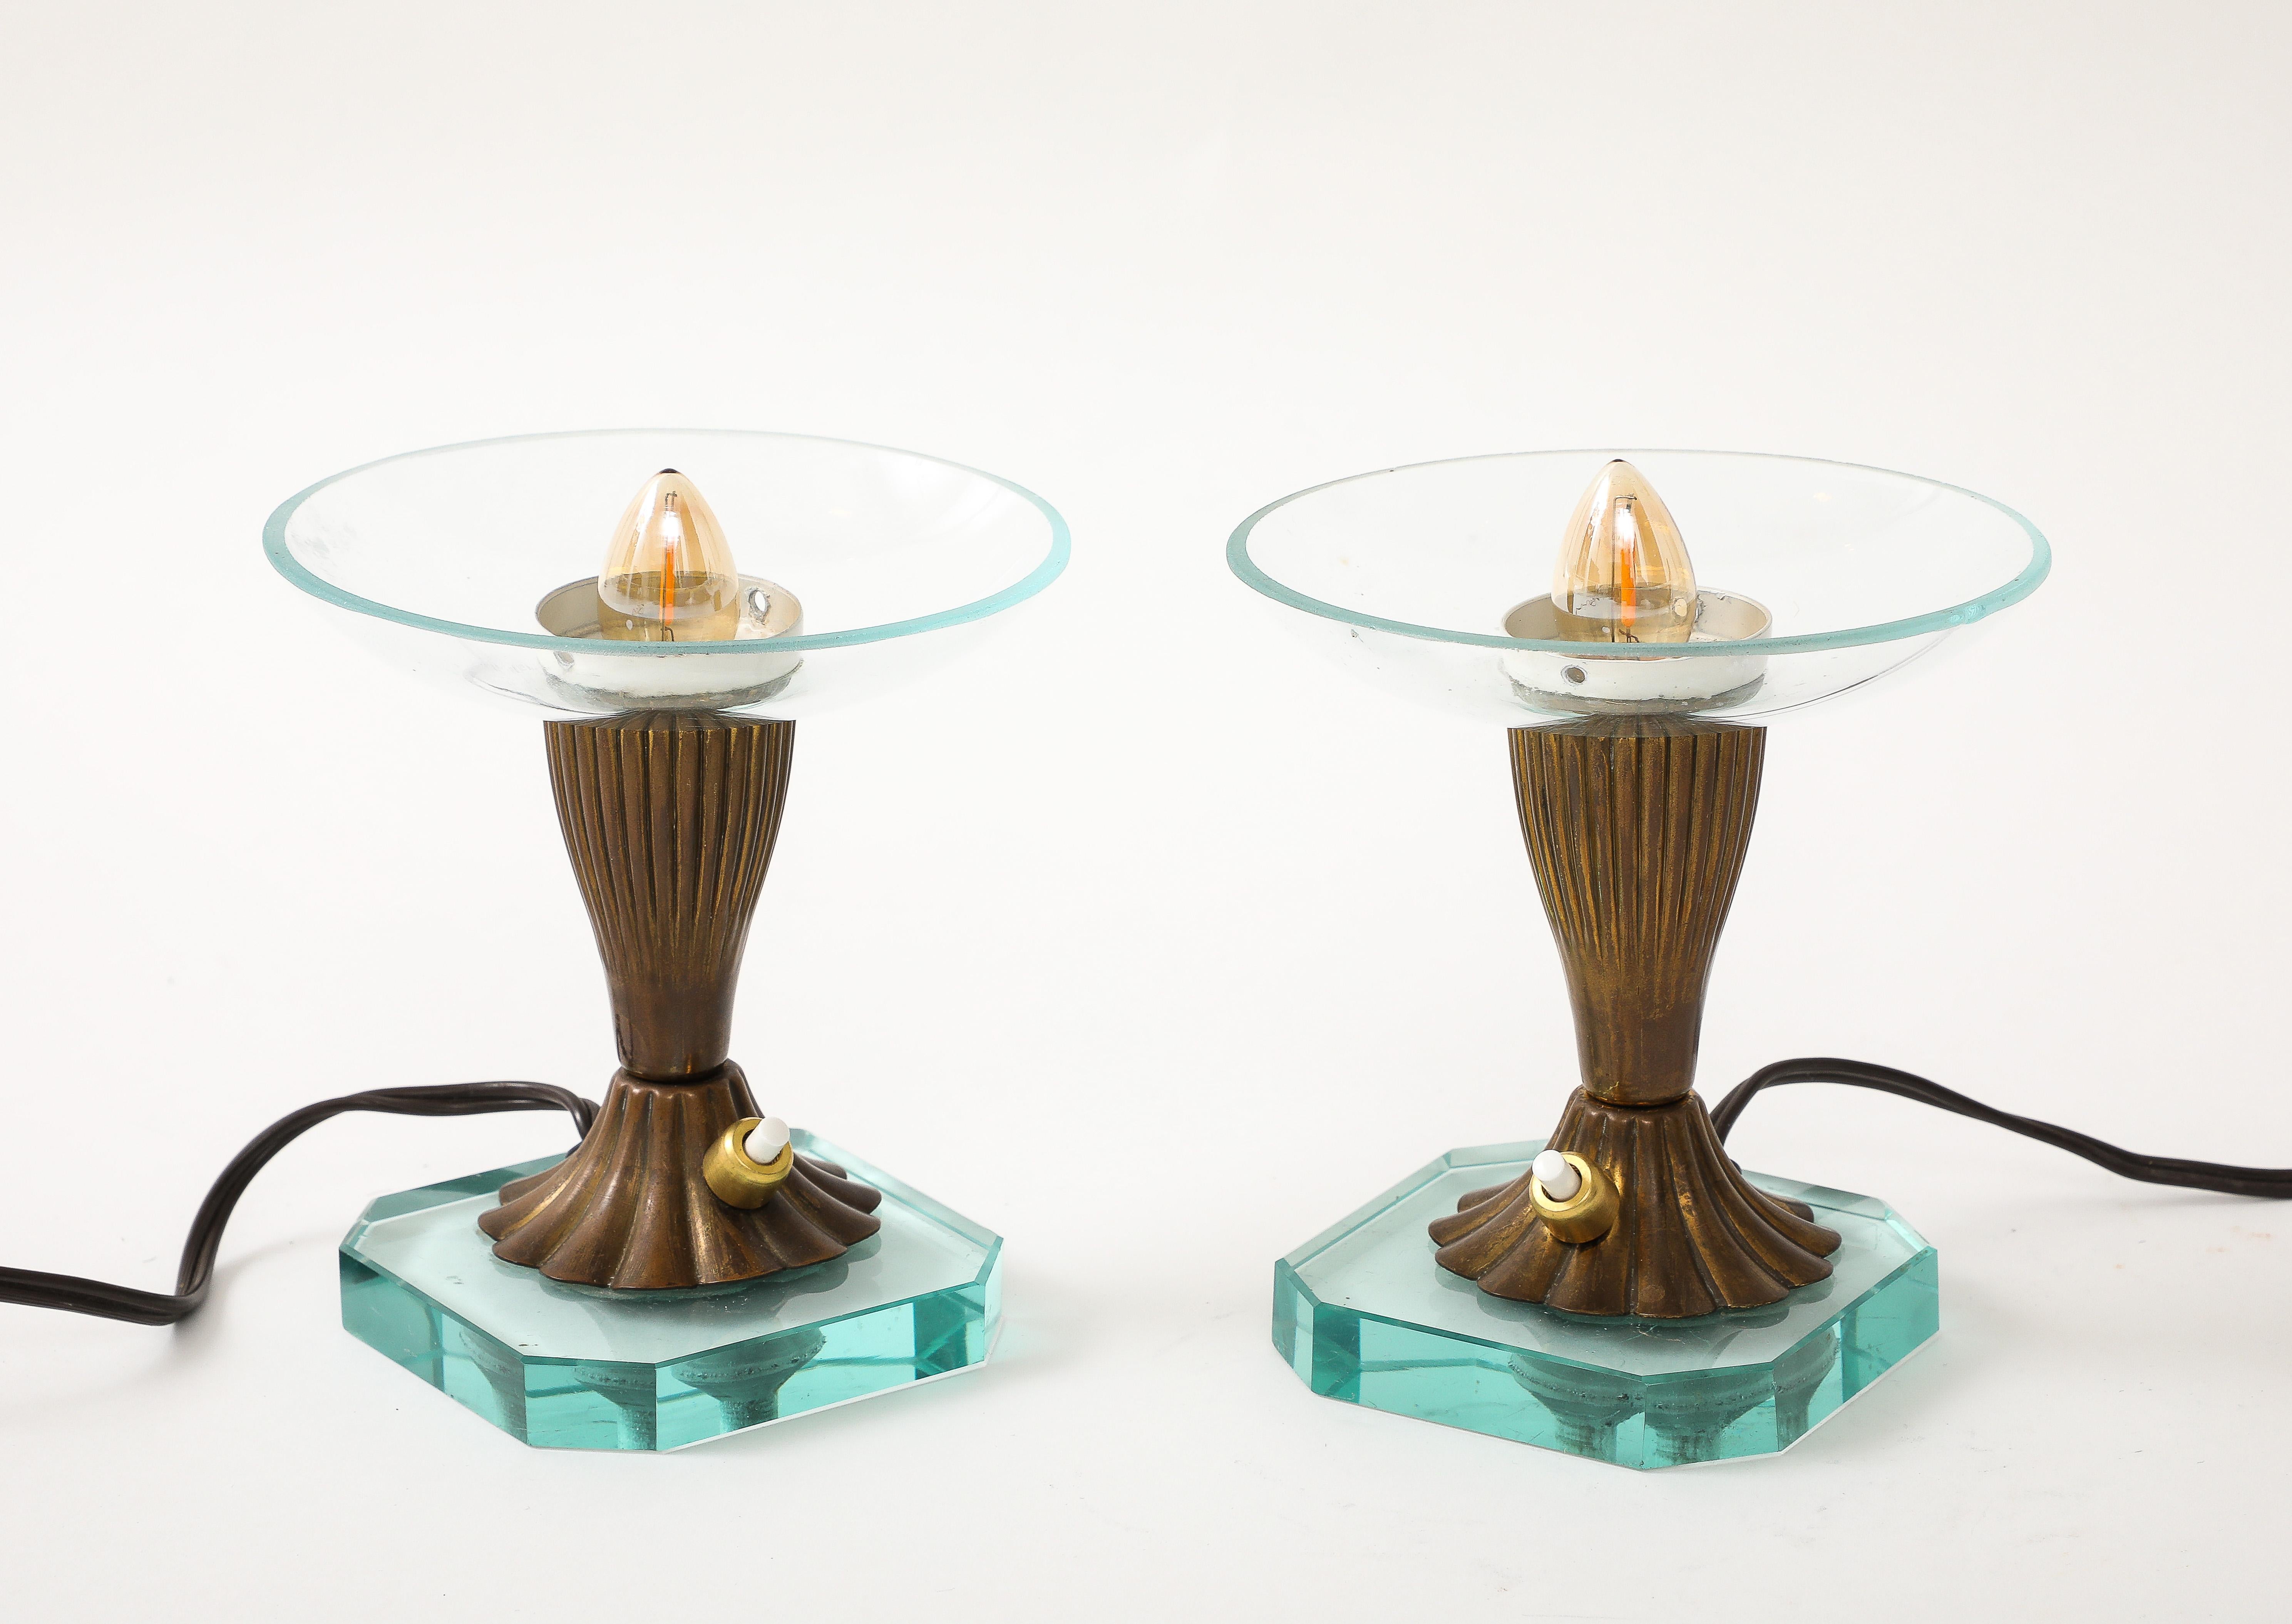 Pair of Glass & Brass Petite Table Lamps att. Pietro Chiesa - Italy 1940's For Sale 1